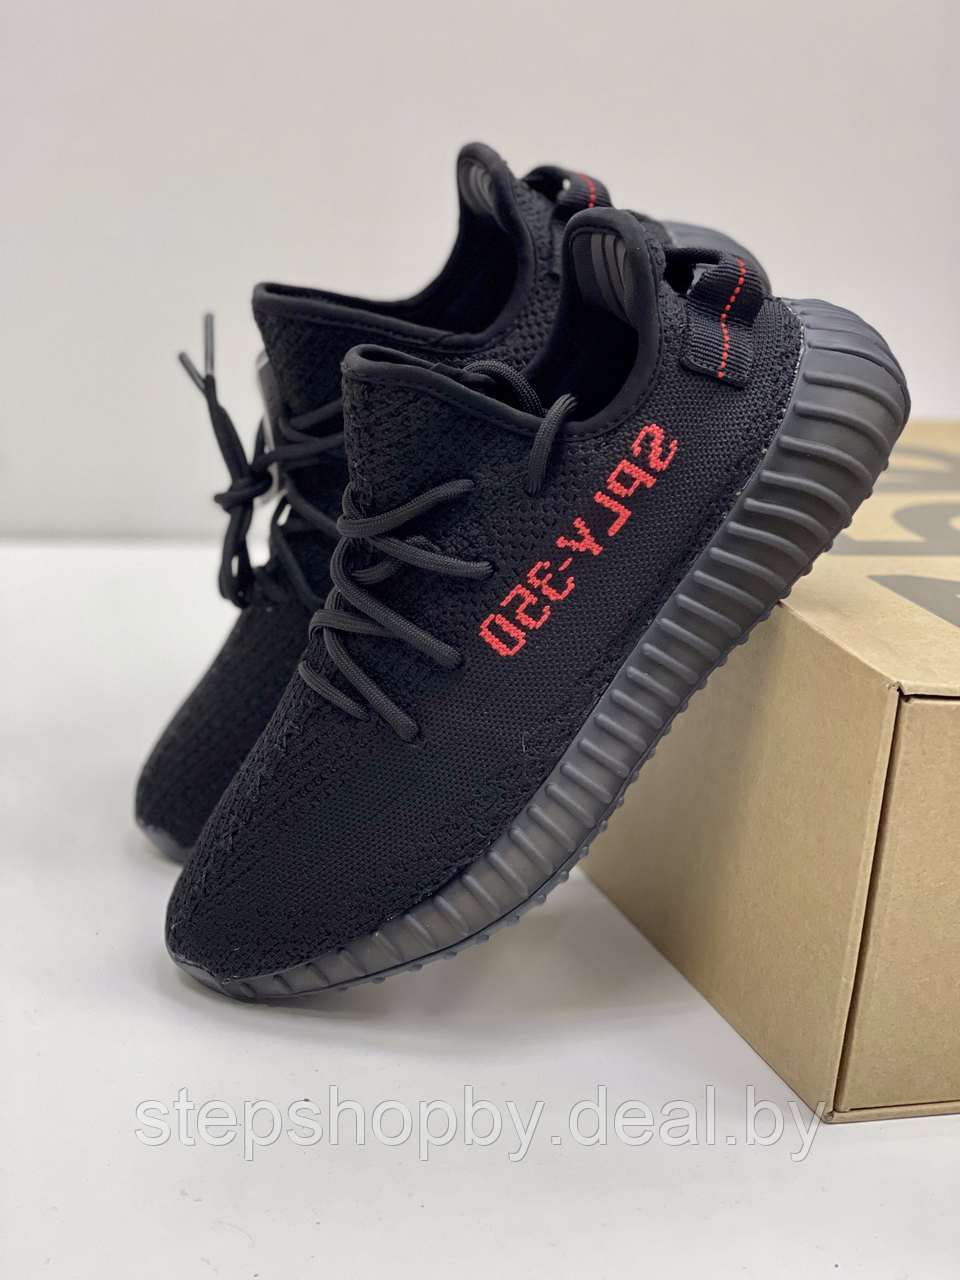 Adidas Yeezy Boost 350 V2 Core Black Red 'Bred' - фото 2 - id-p177723571